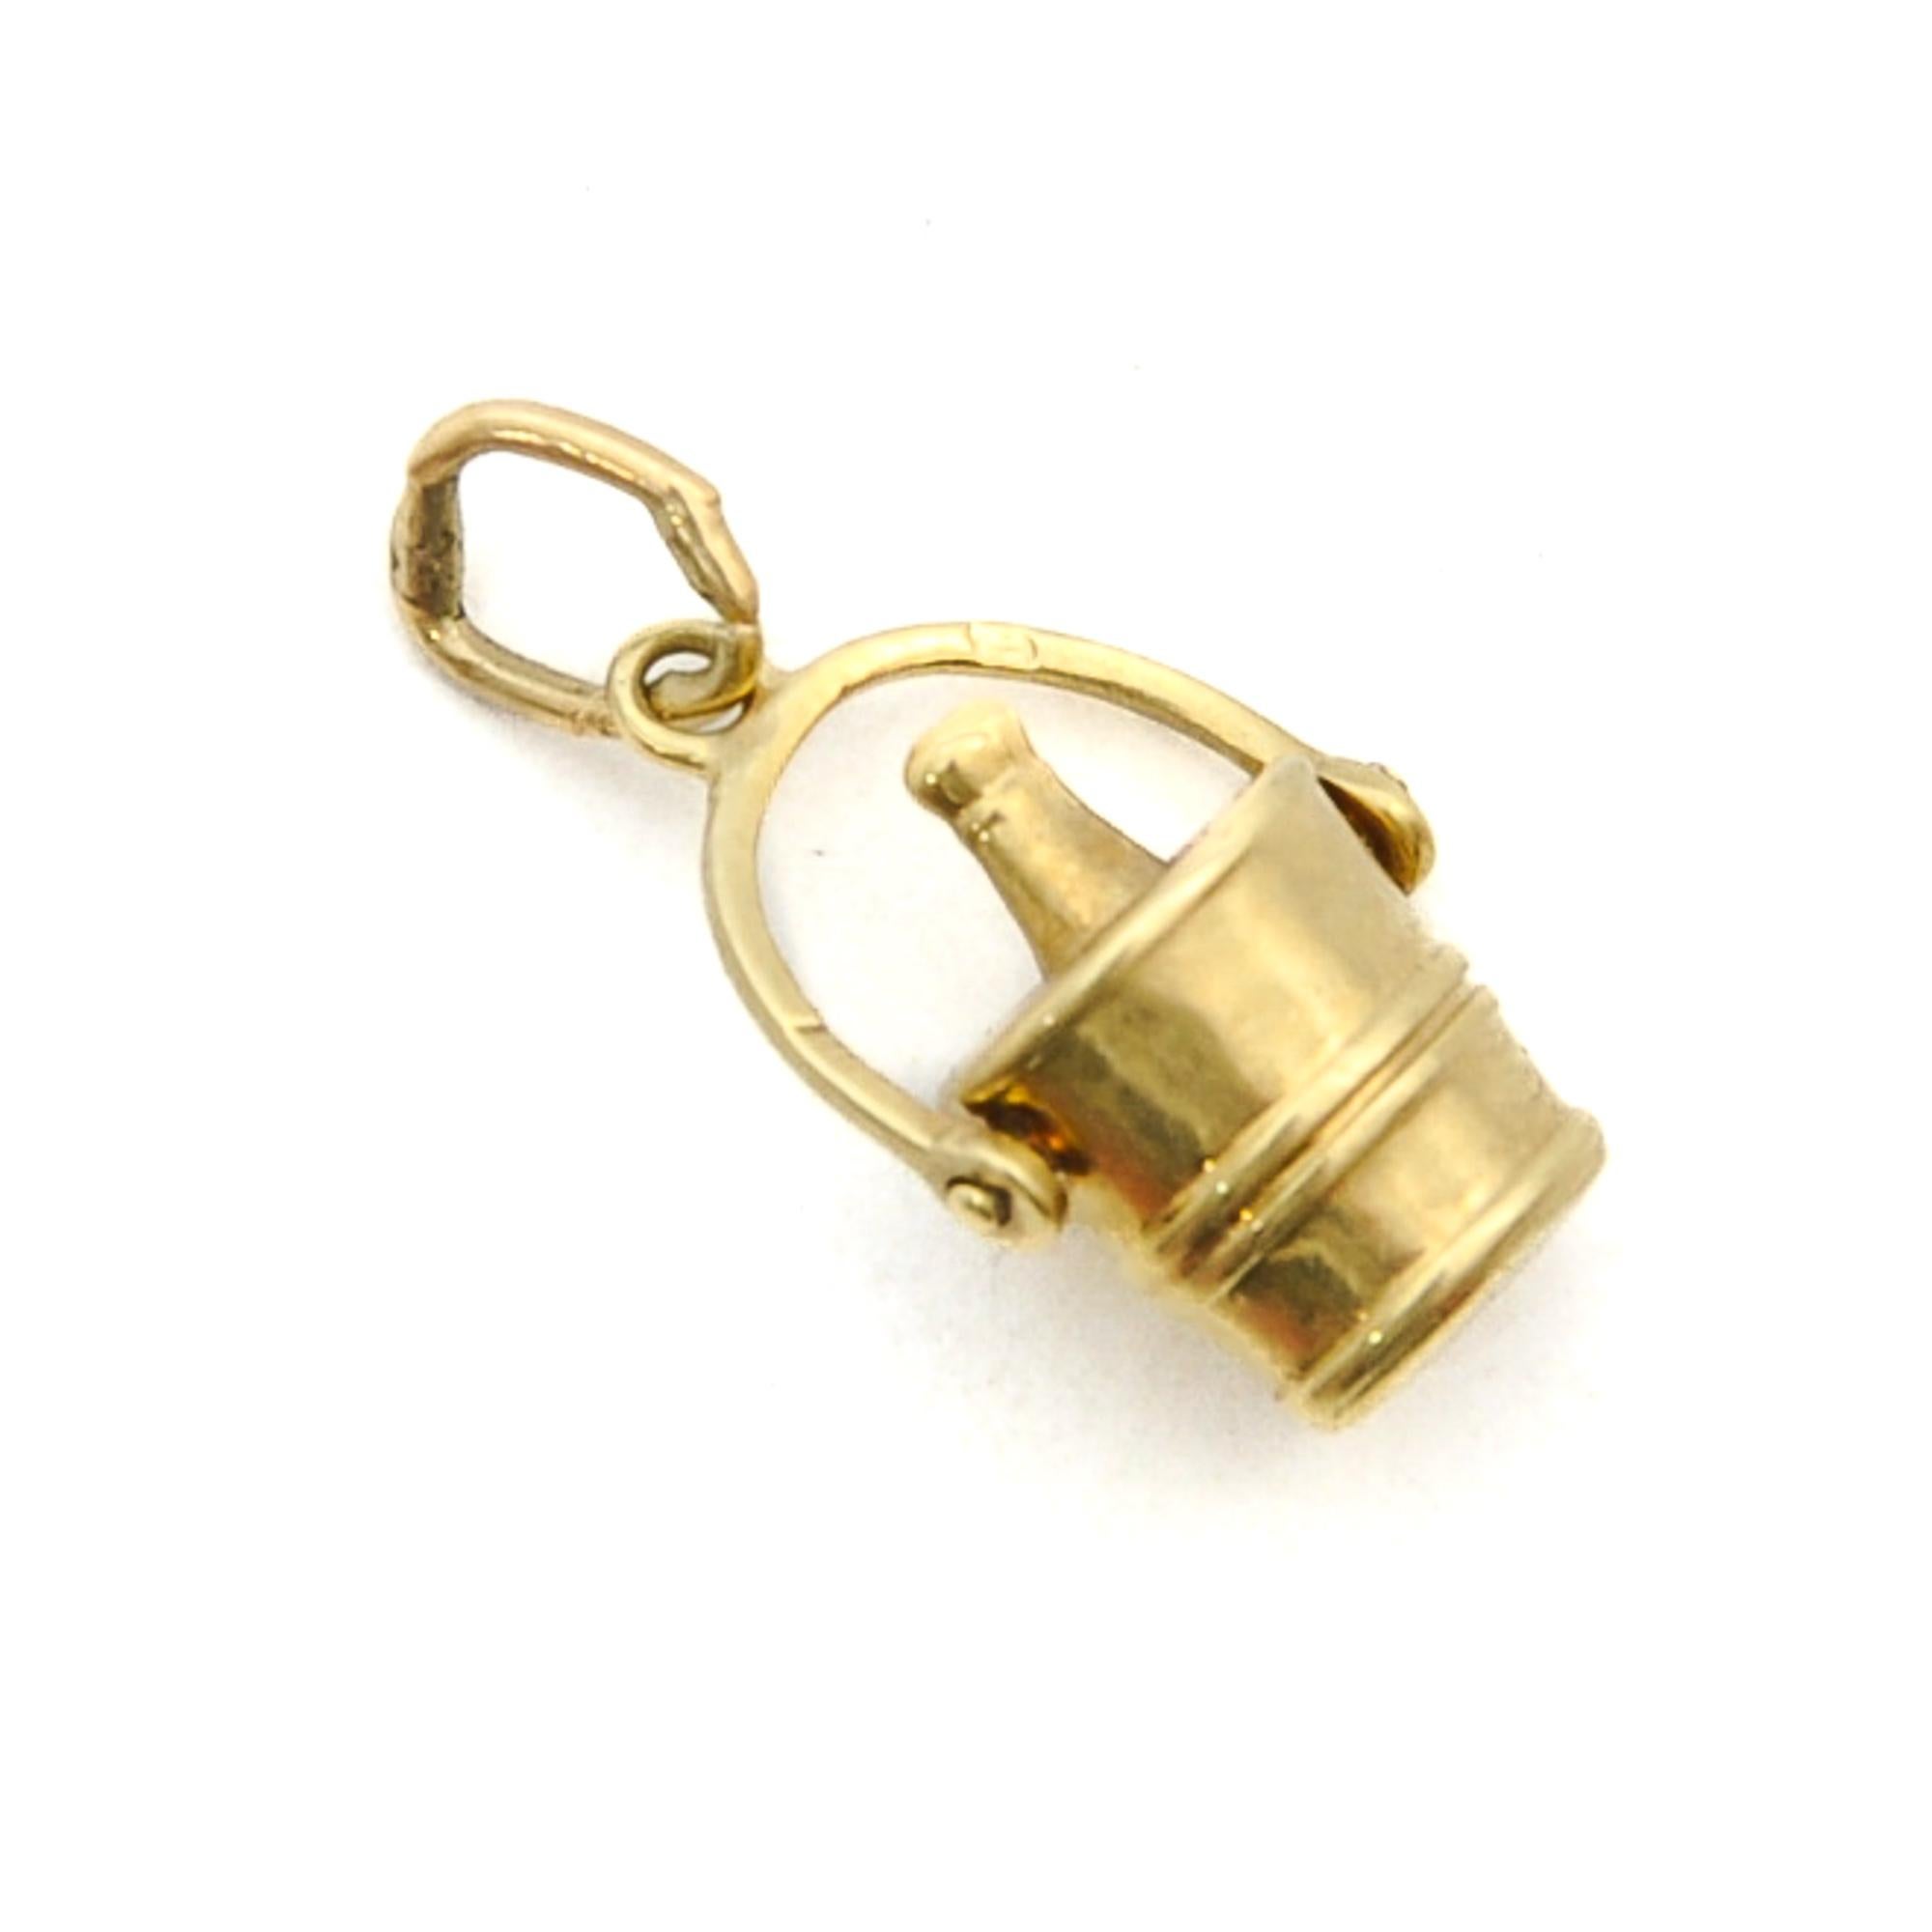 A vintage mid-century gold wine cooler bucket charm pendant. The charm has nice detailing with a movable handle and the bottle is kept cool in this ice bucket. The charm is created in 14 karat yellow gold. Charms are great to collect as wearable